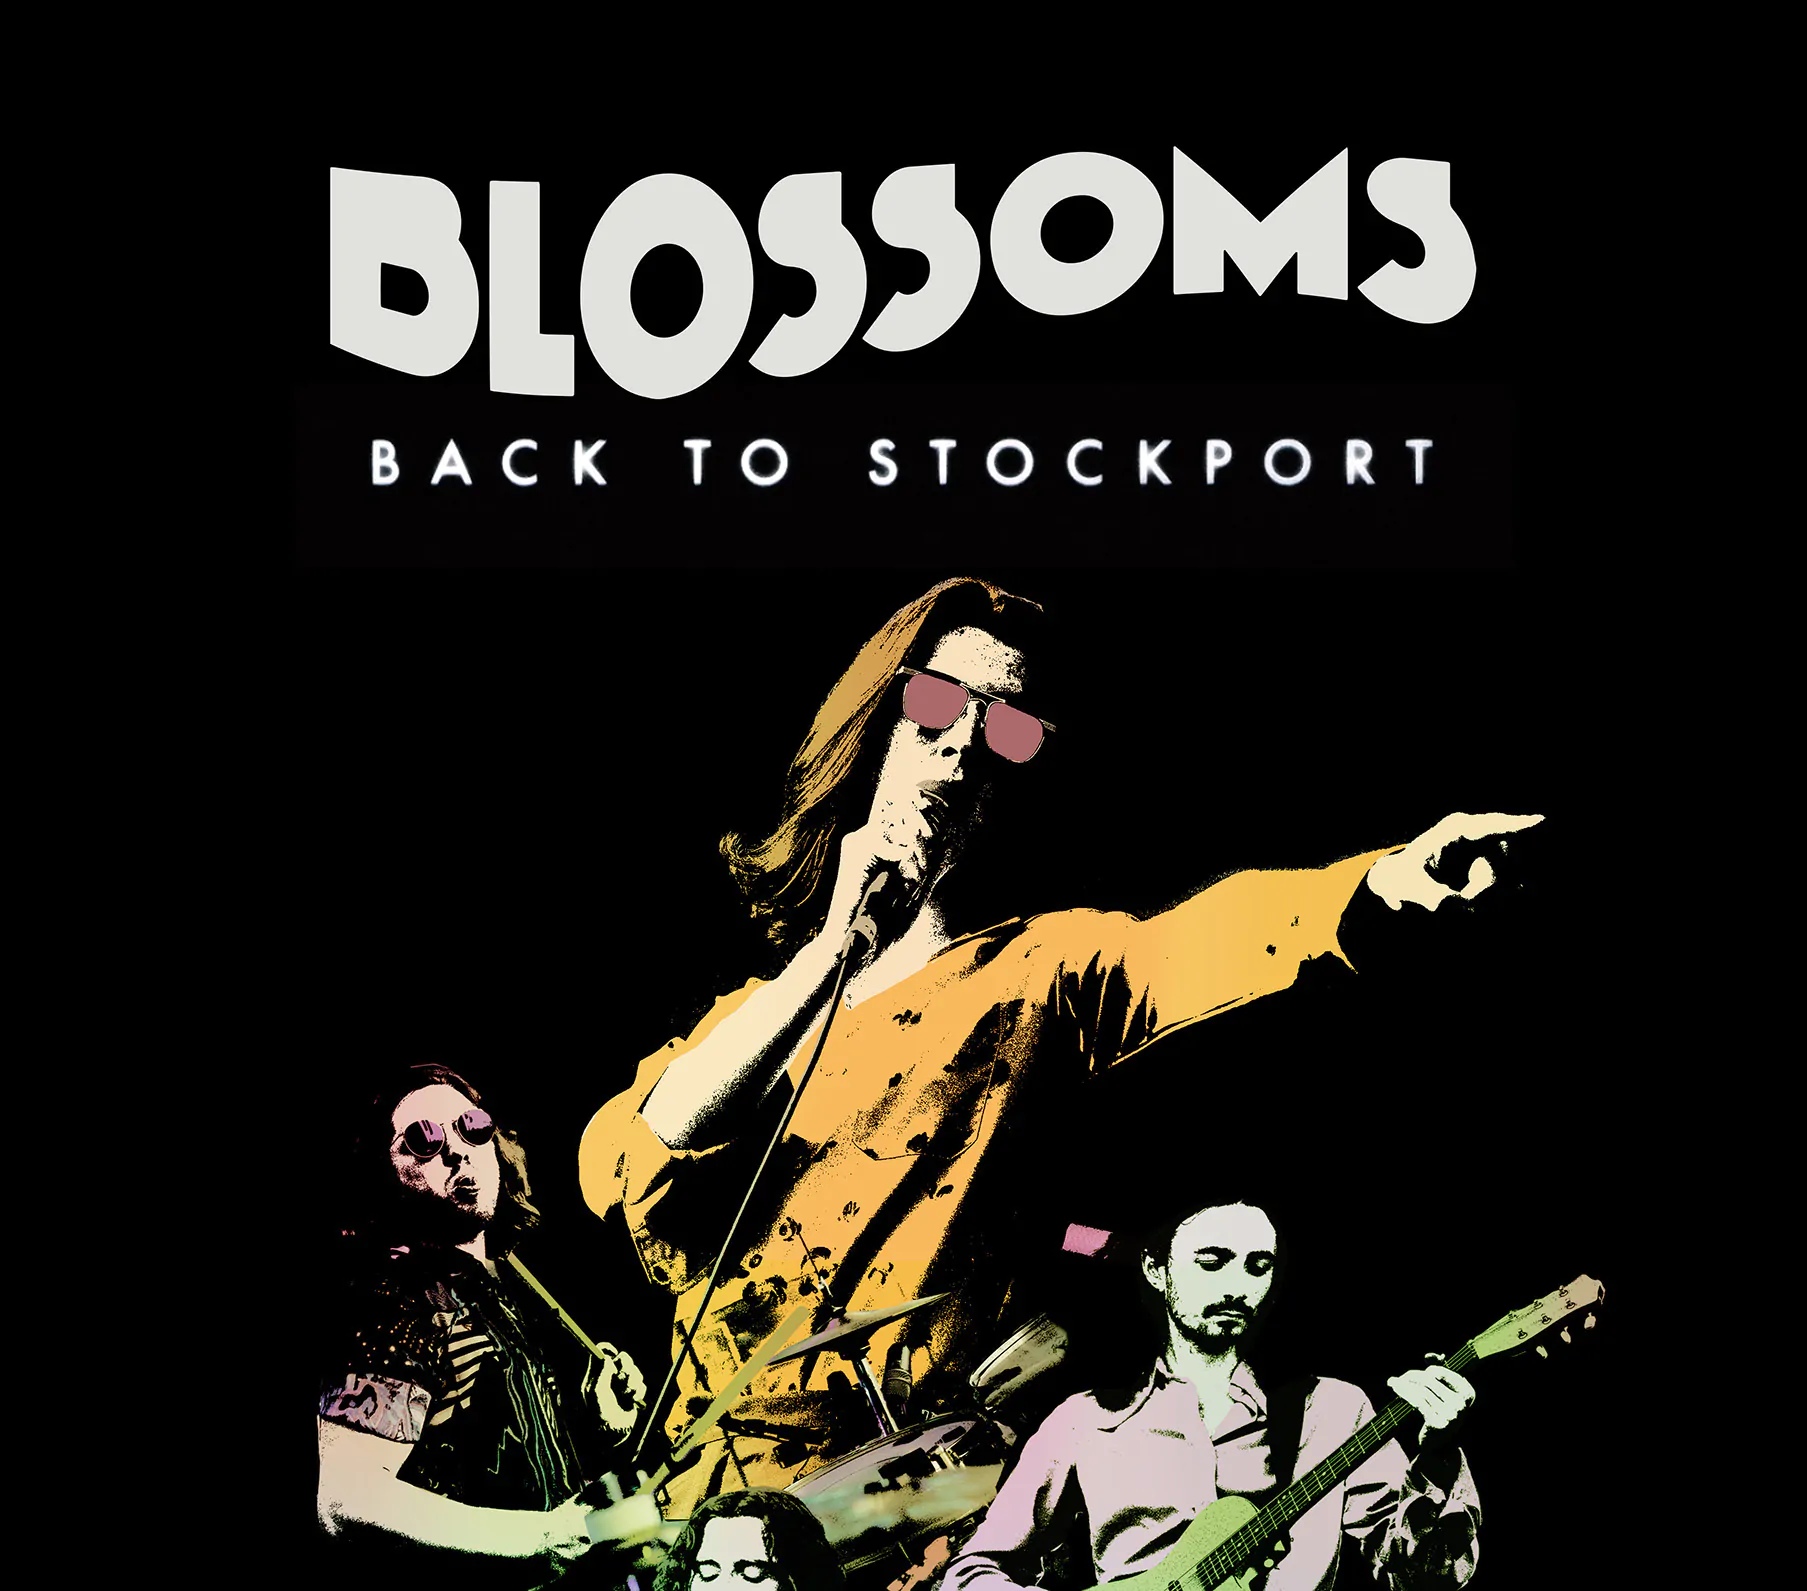 BLOSSOMS announce details of their brand-new, feature-length documentary ‘BACK TO STOCKPORT’